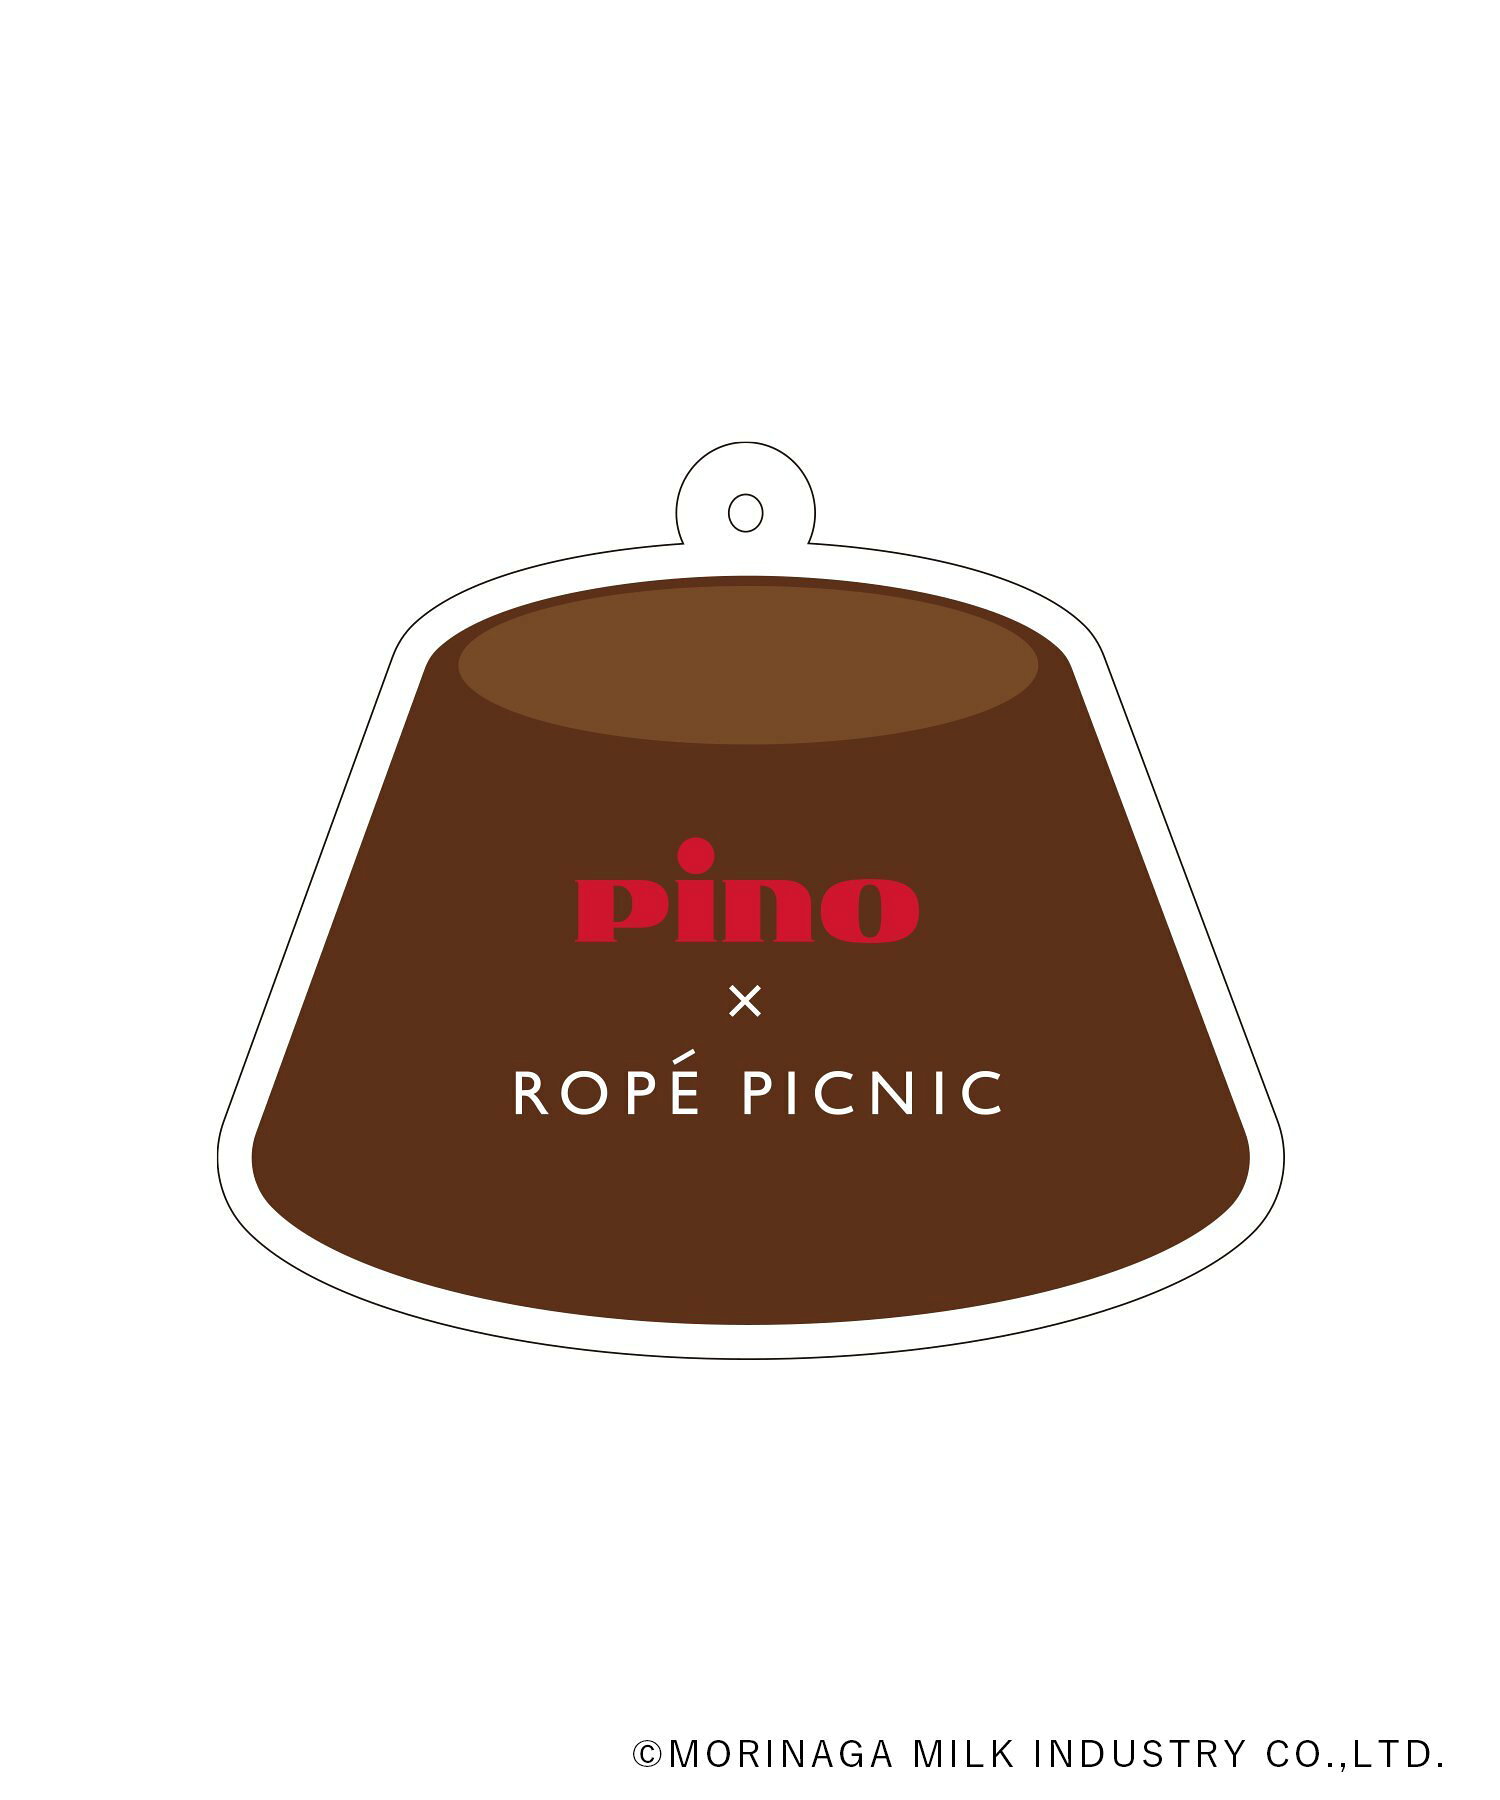 【KIDS】【Pino meets ROPE' PICNIC】【晴雨兼用・遮光】キッズ傘